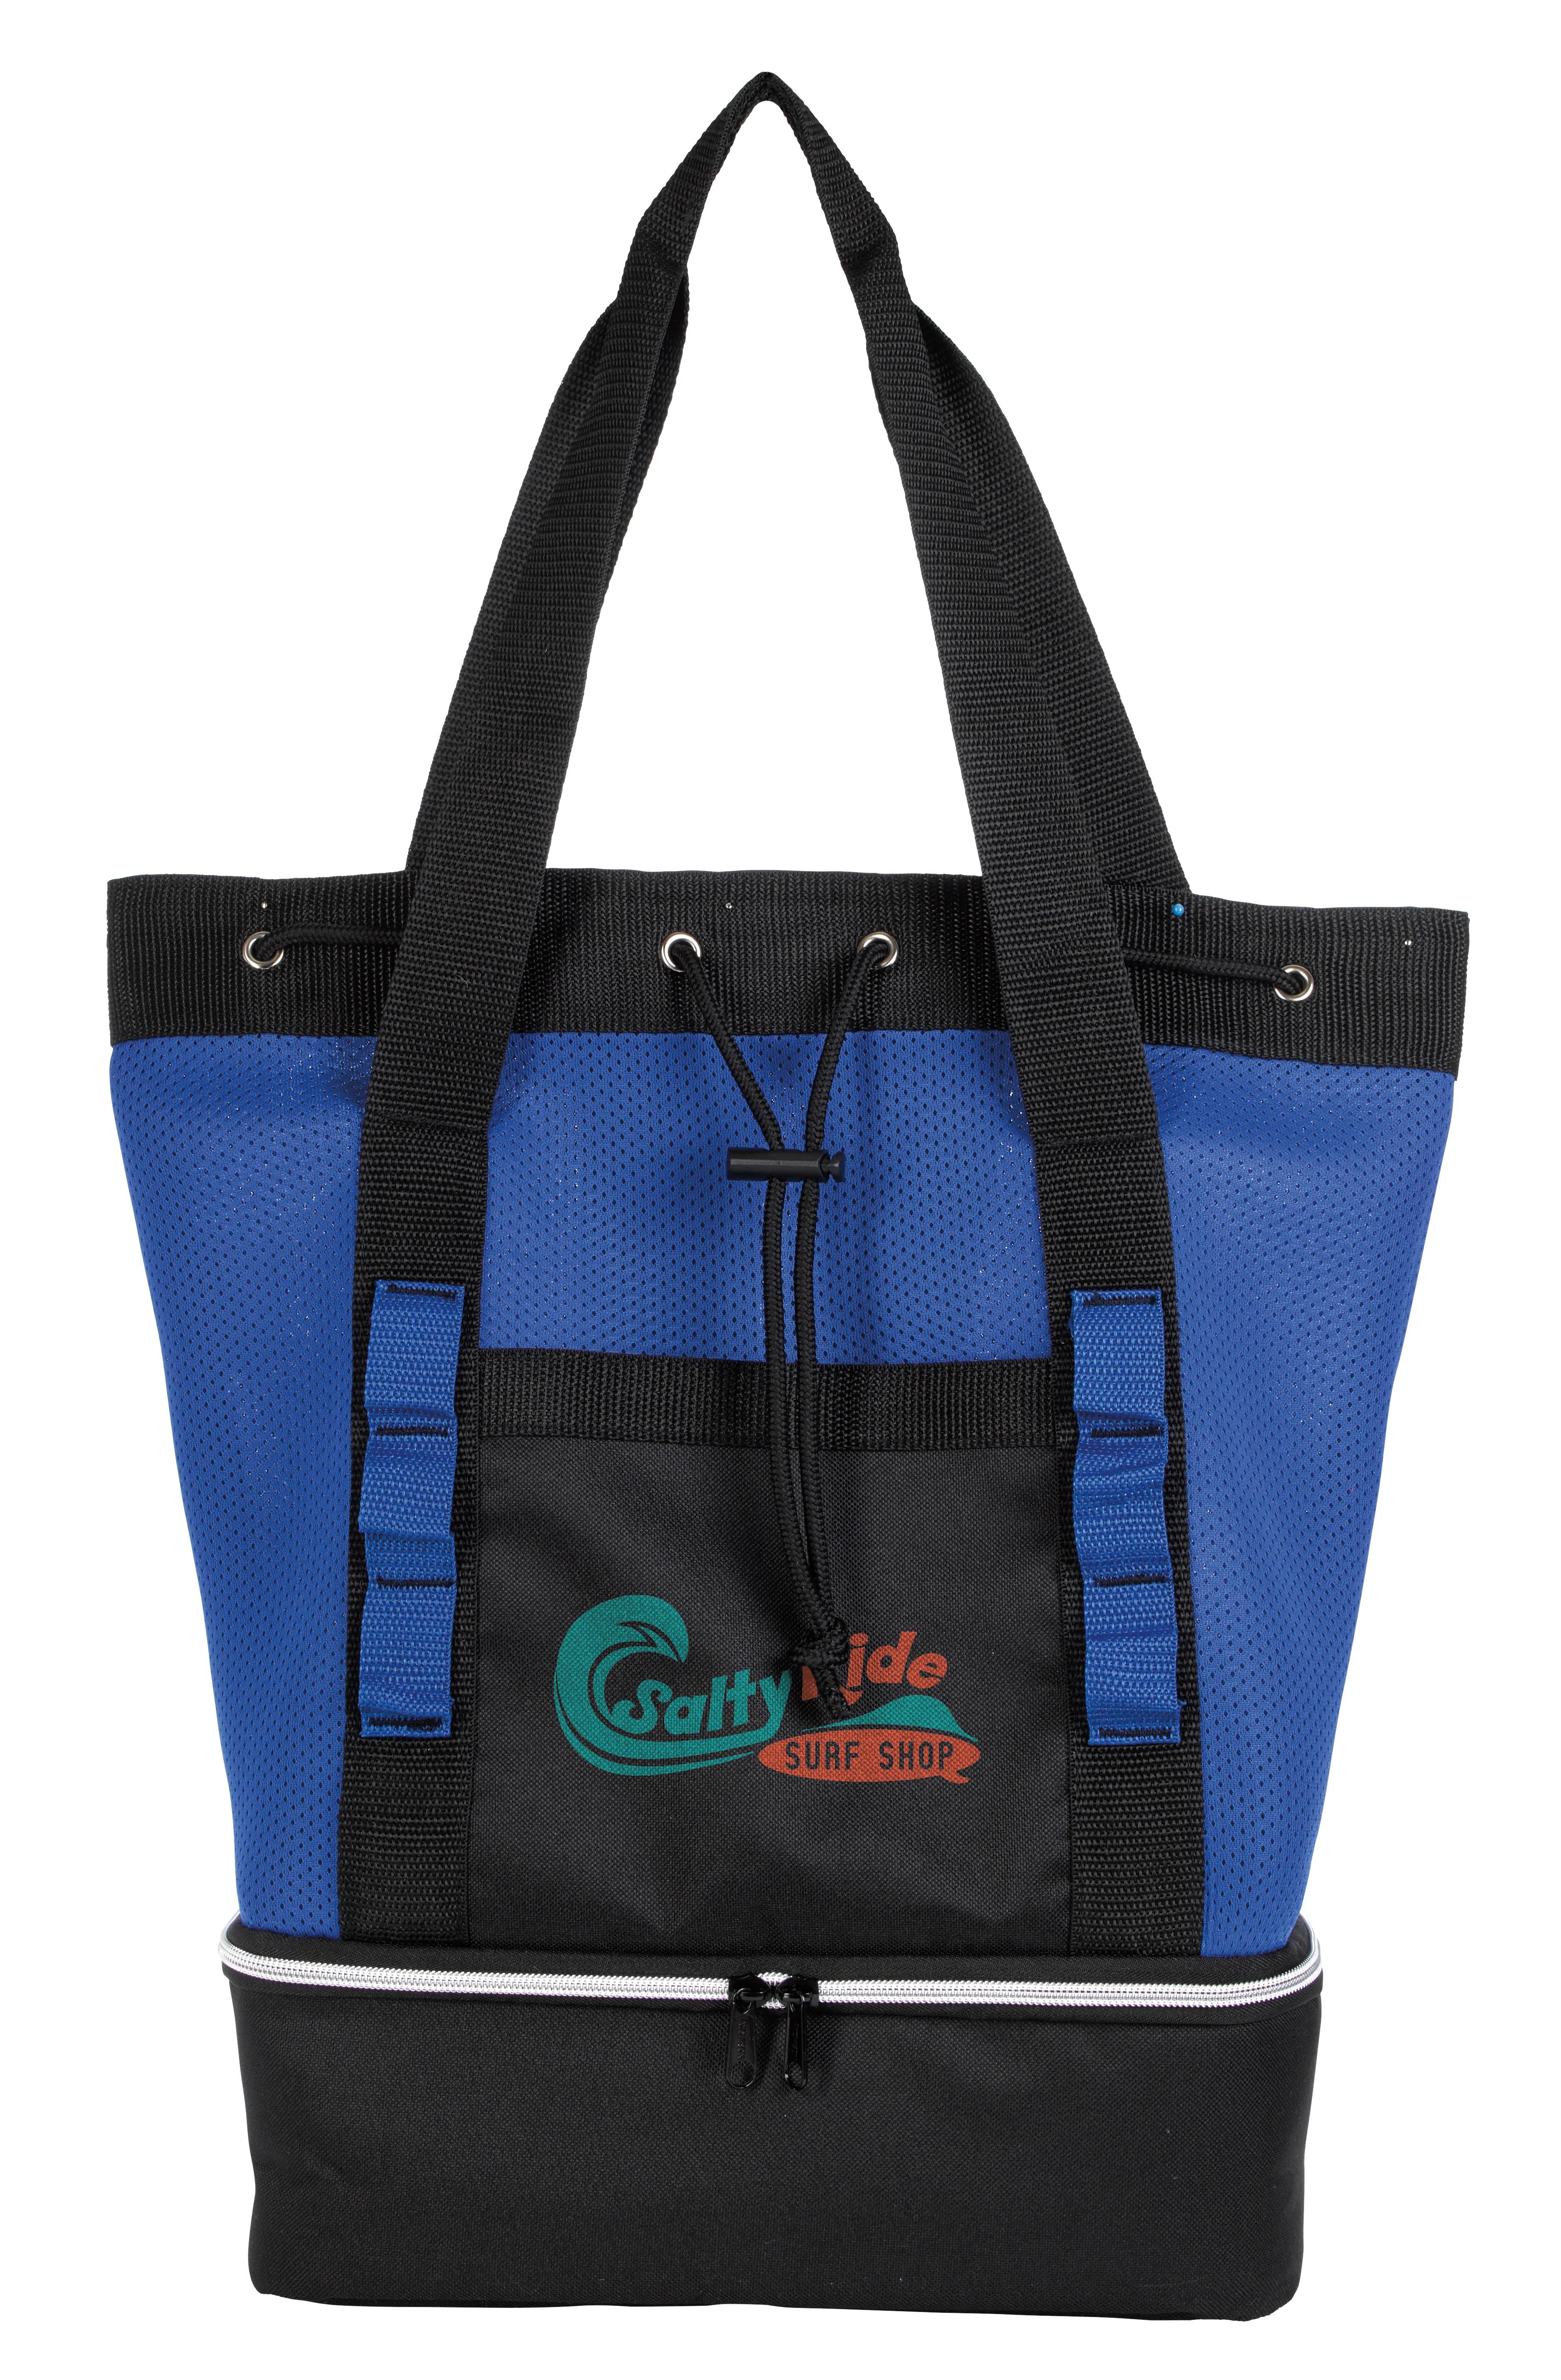 Brightwater Dual-Compartment Tote-Pack Cooler 13 of 43